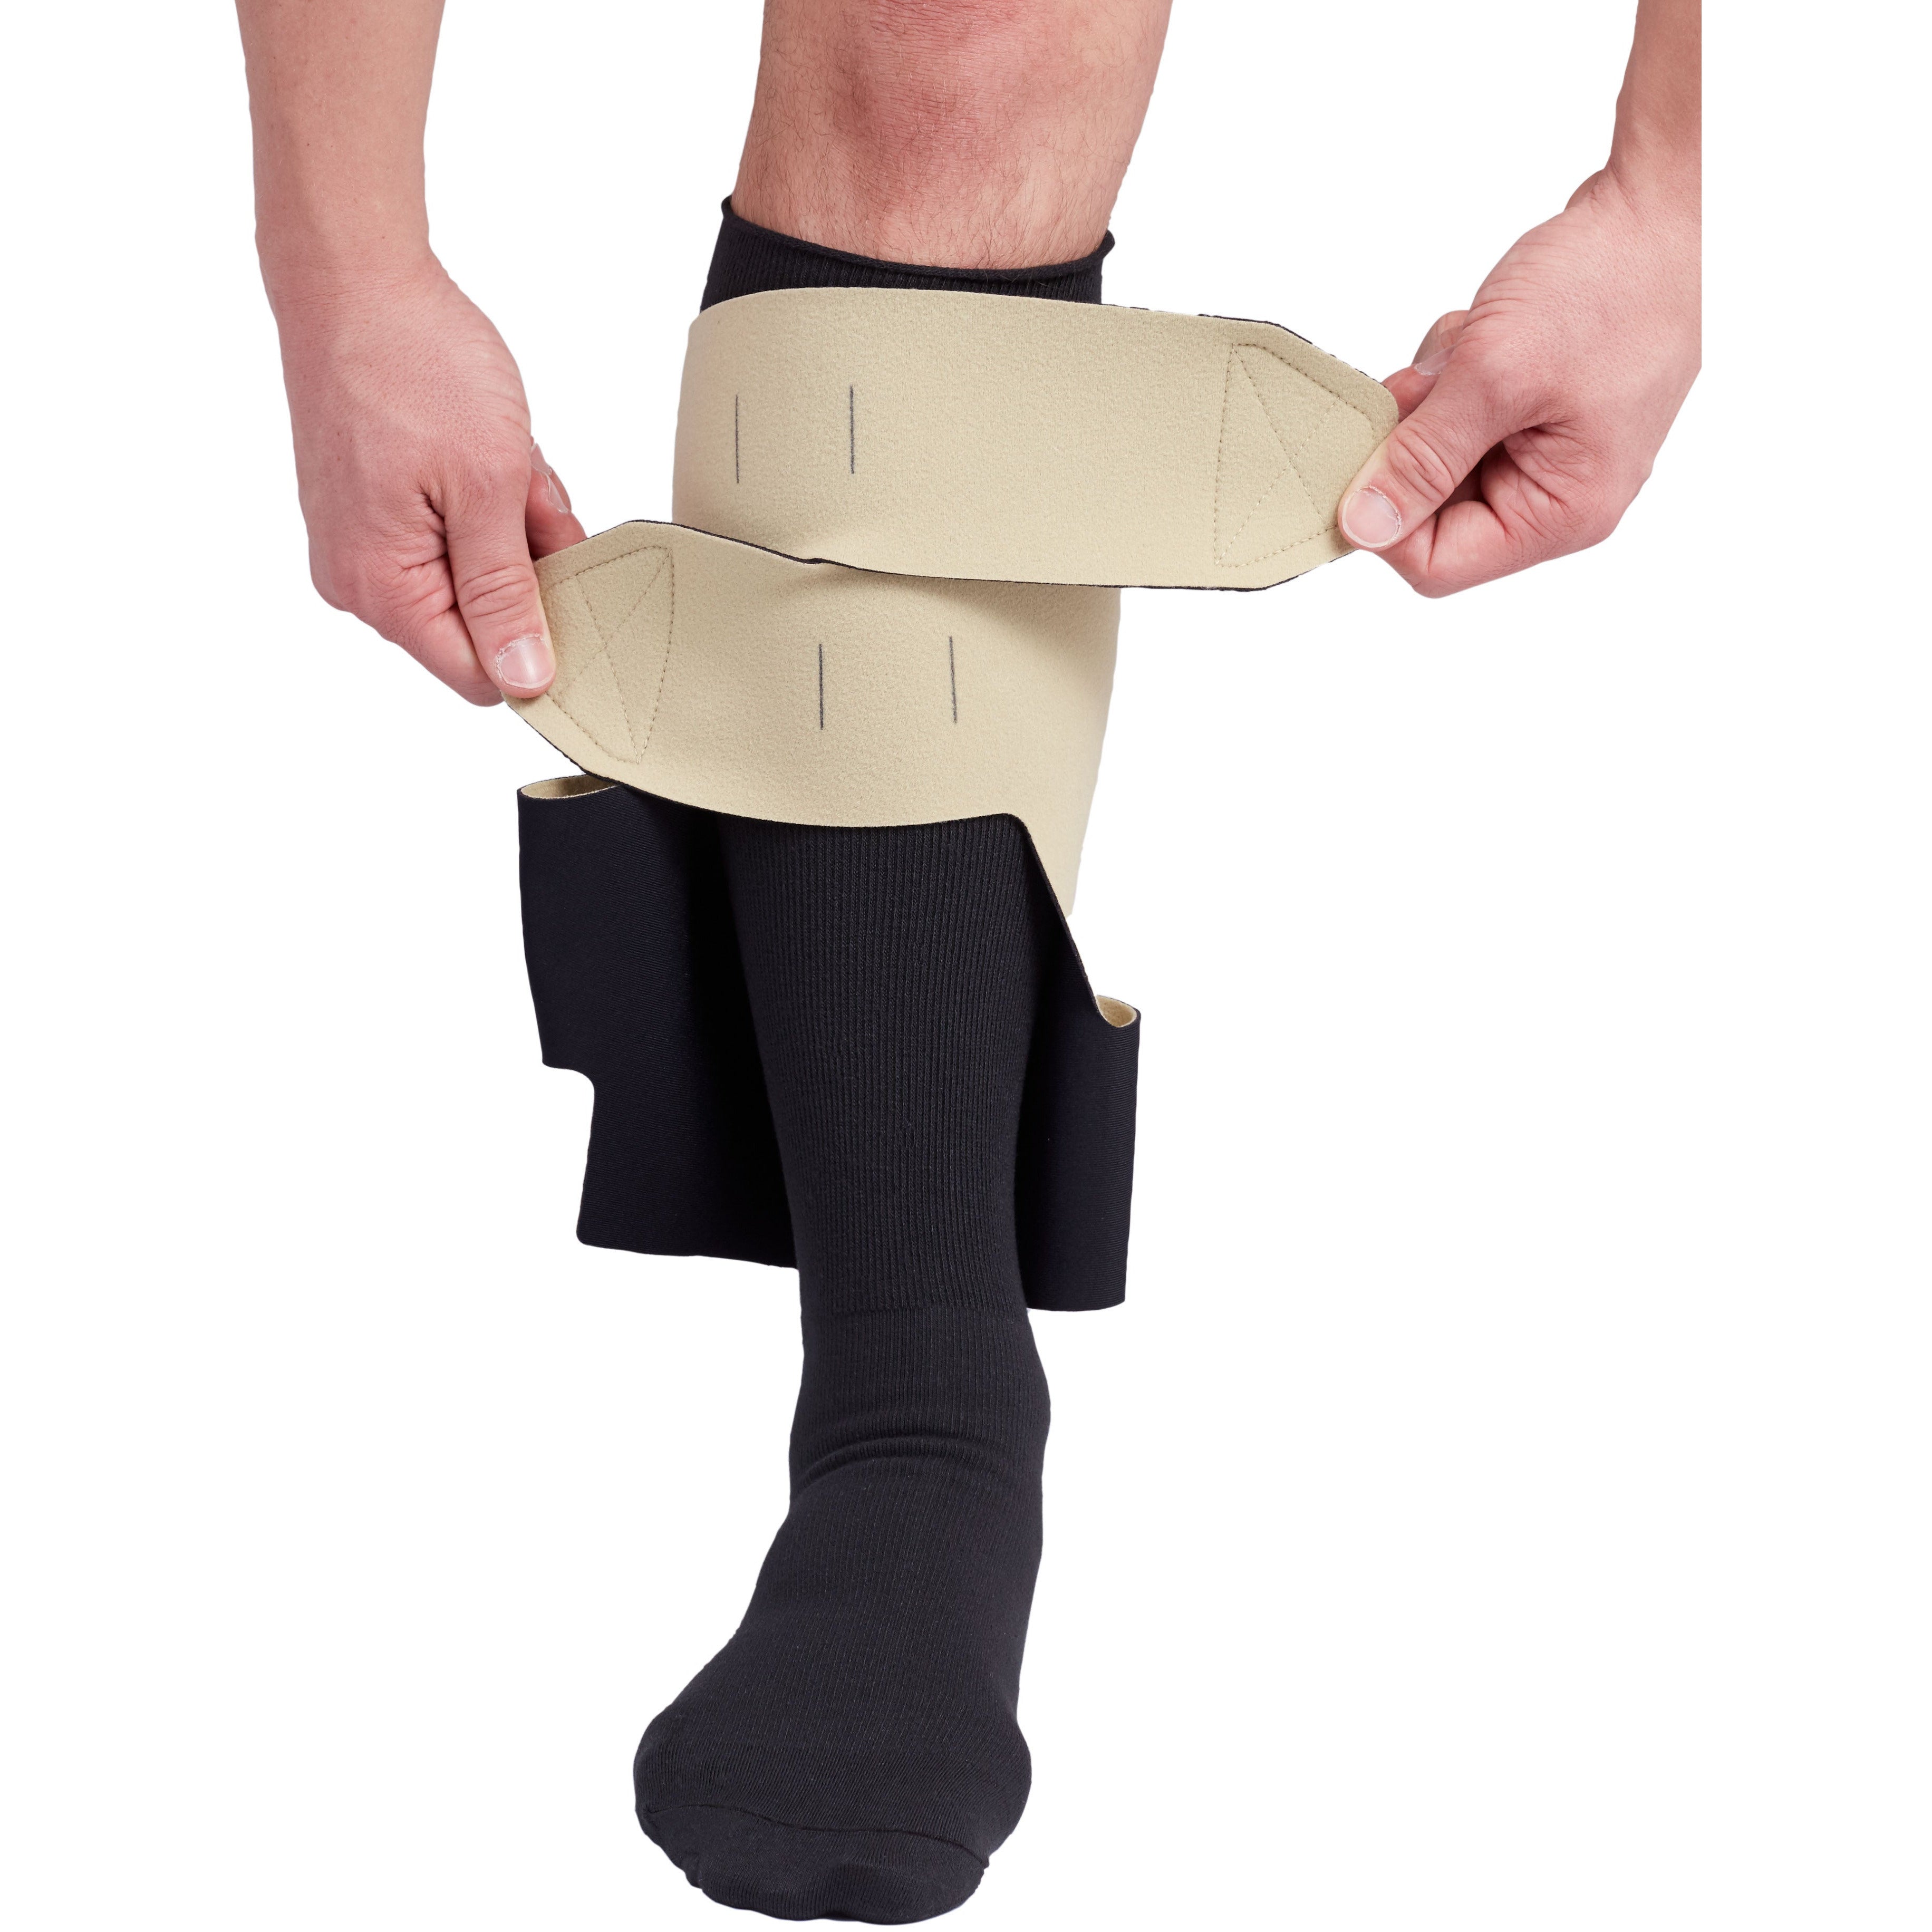 circaid Juxtalite Lower Leg System Designed for Compression and